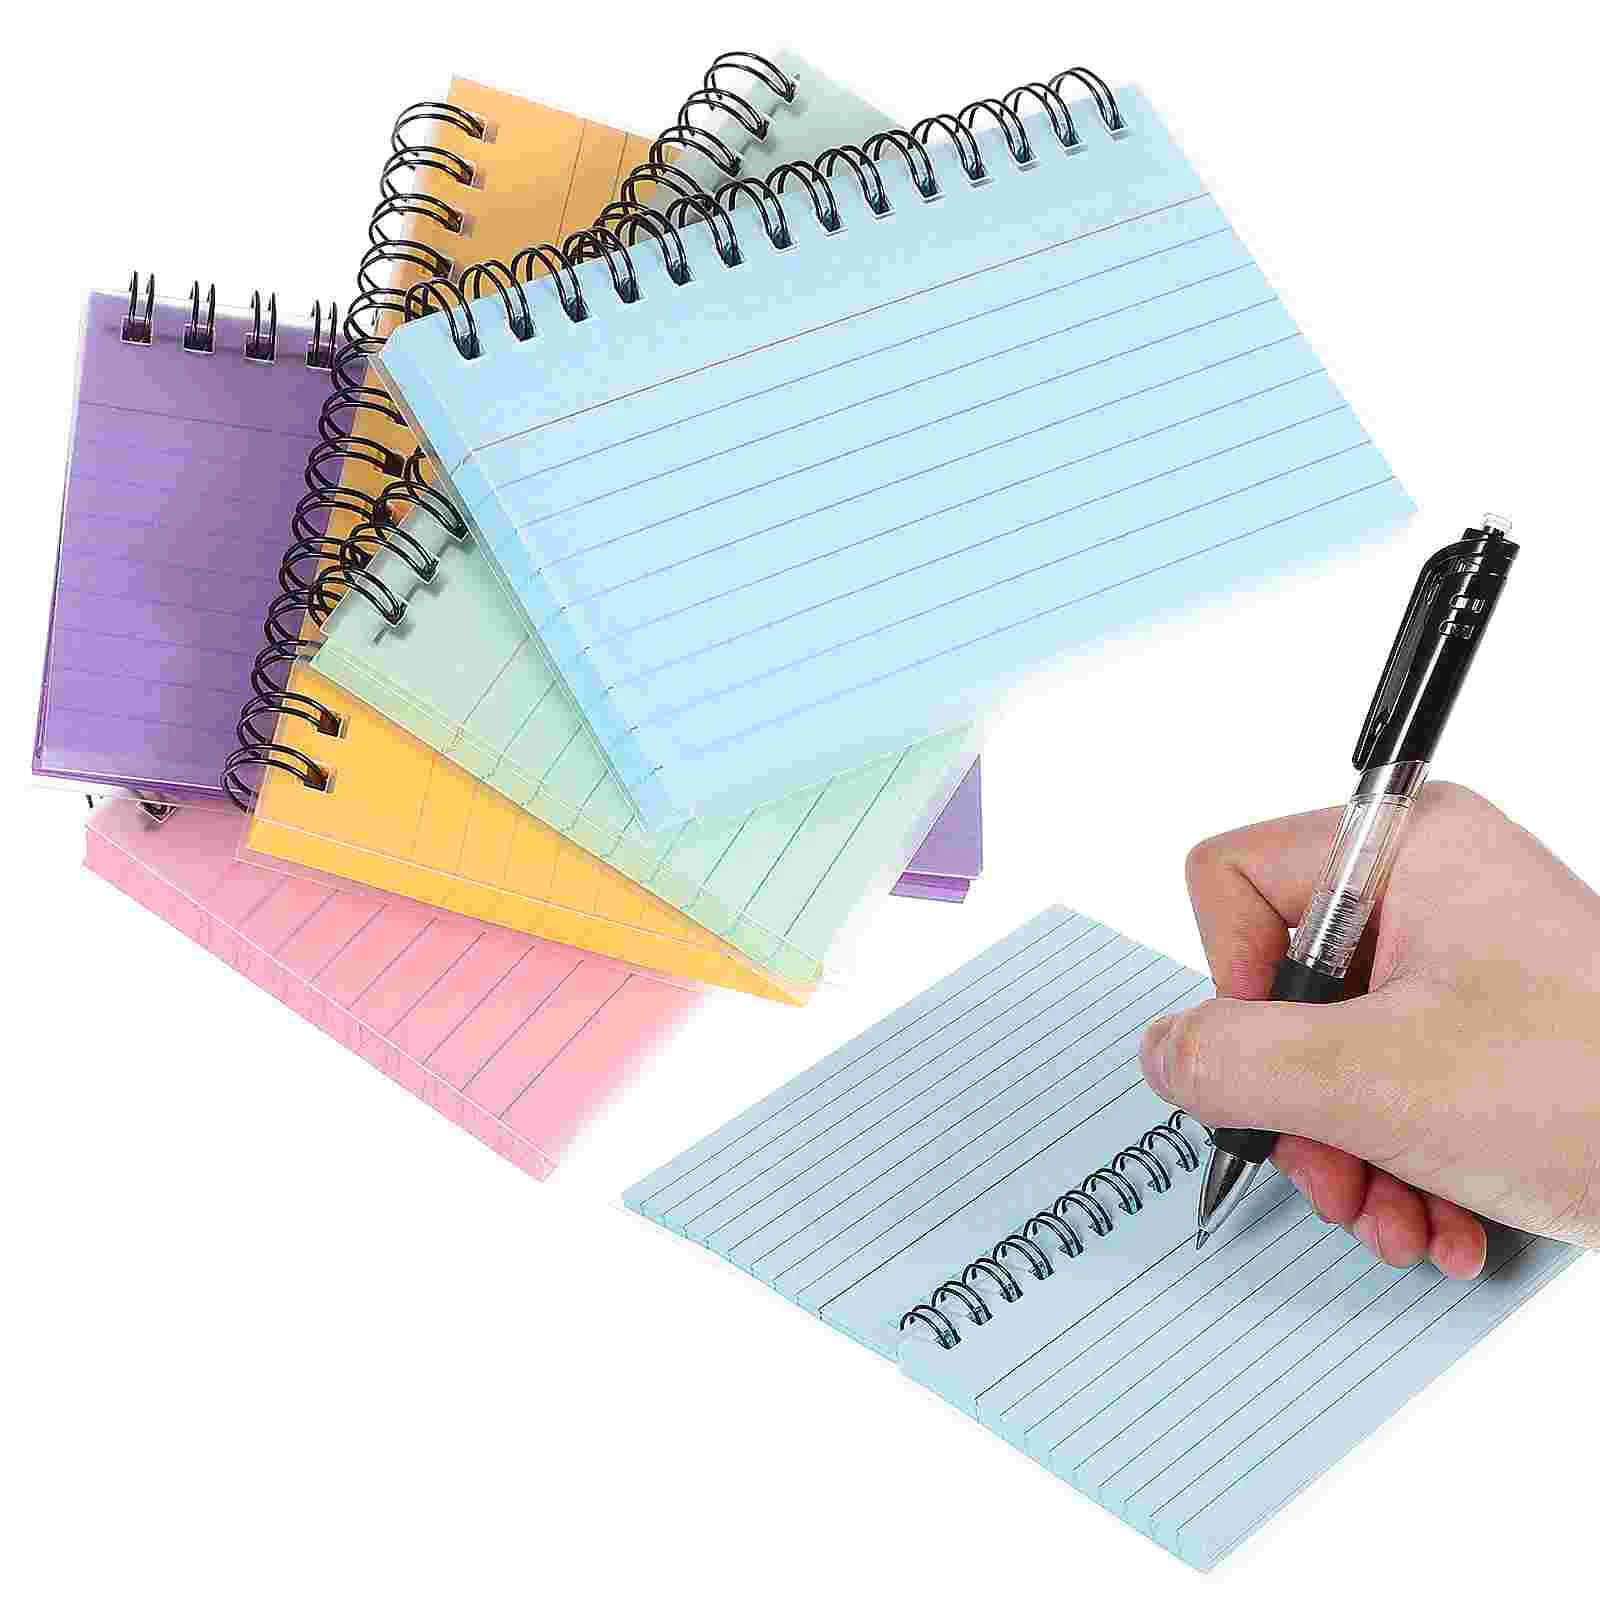 

5 Pcs Notebook Memo Index Papers Blank Card Speech Cards Record Notepad Student Spiral Flashcards for study